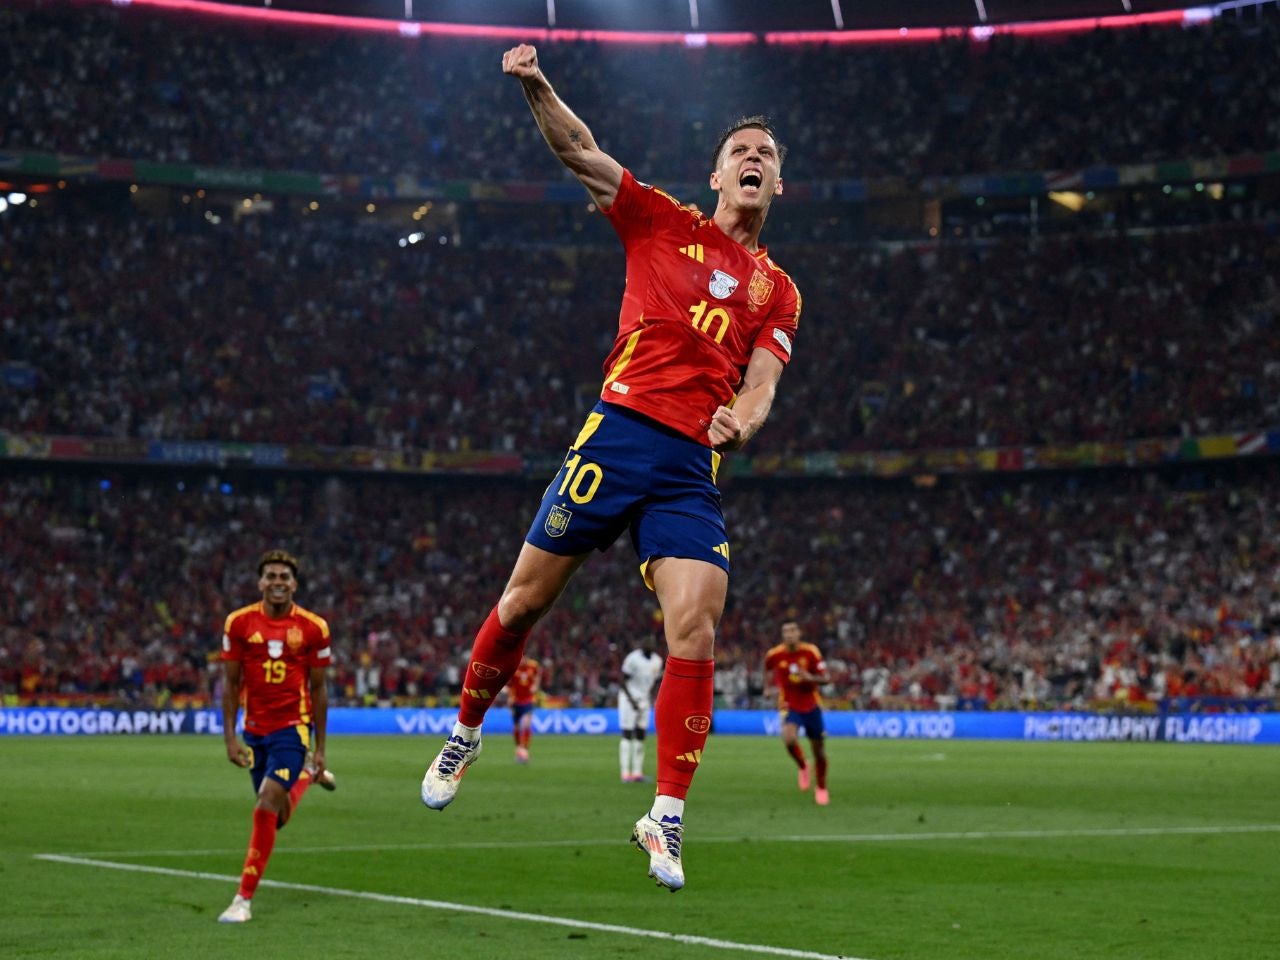 Match Analysis: Spain 2-1 France - highlights, man of the match, stats